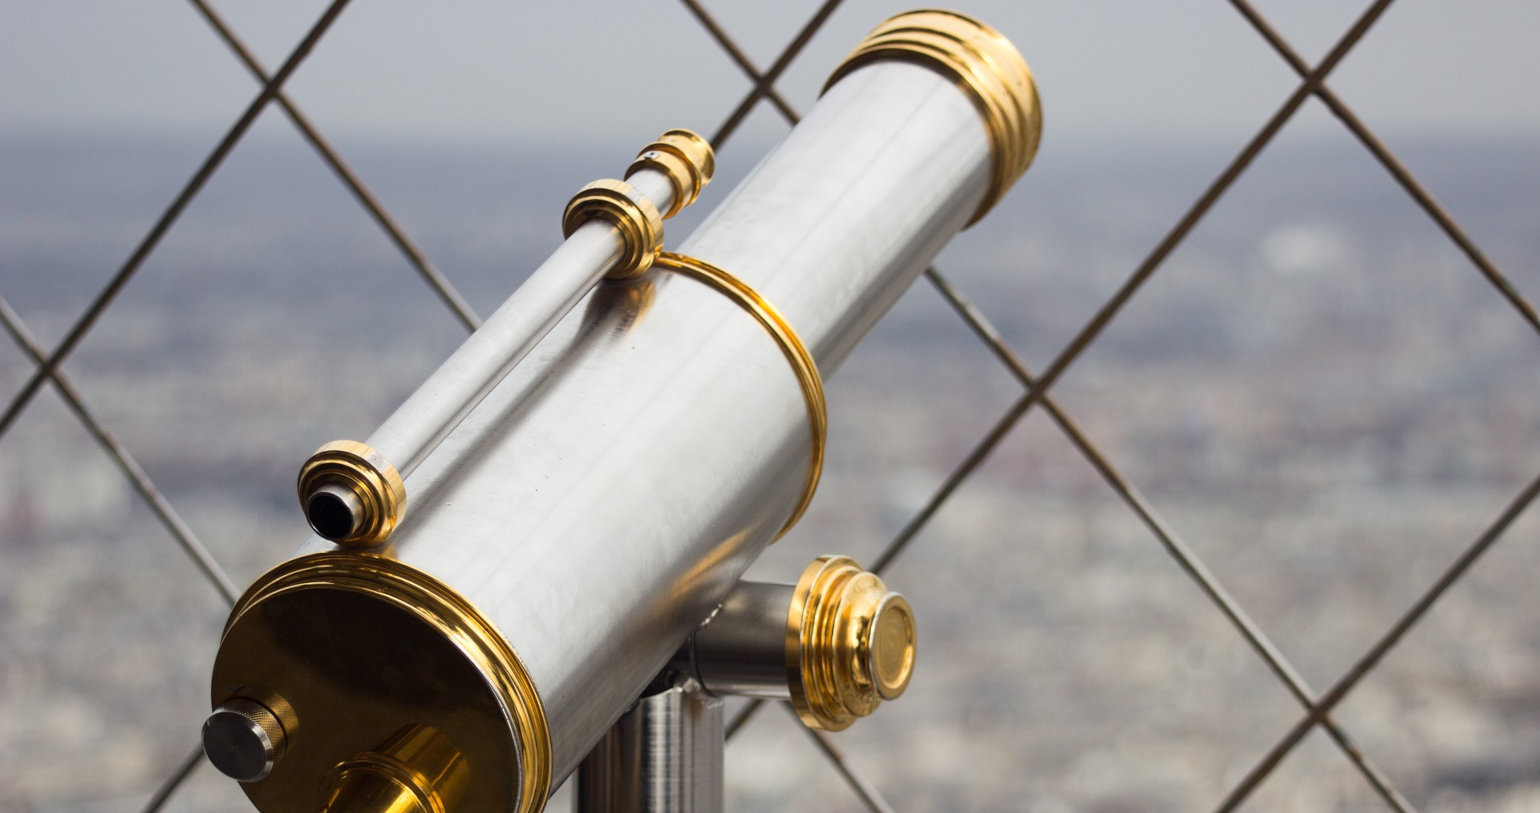 Mounted telescope monocular pointing through a wire fence